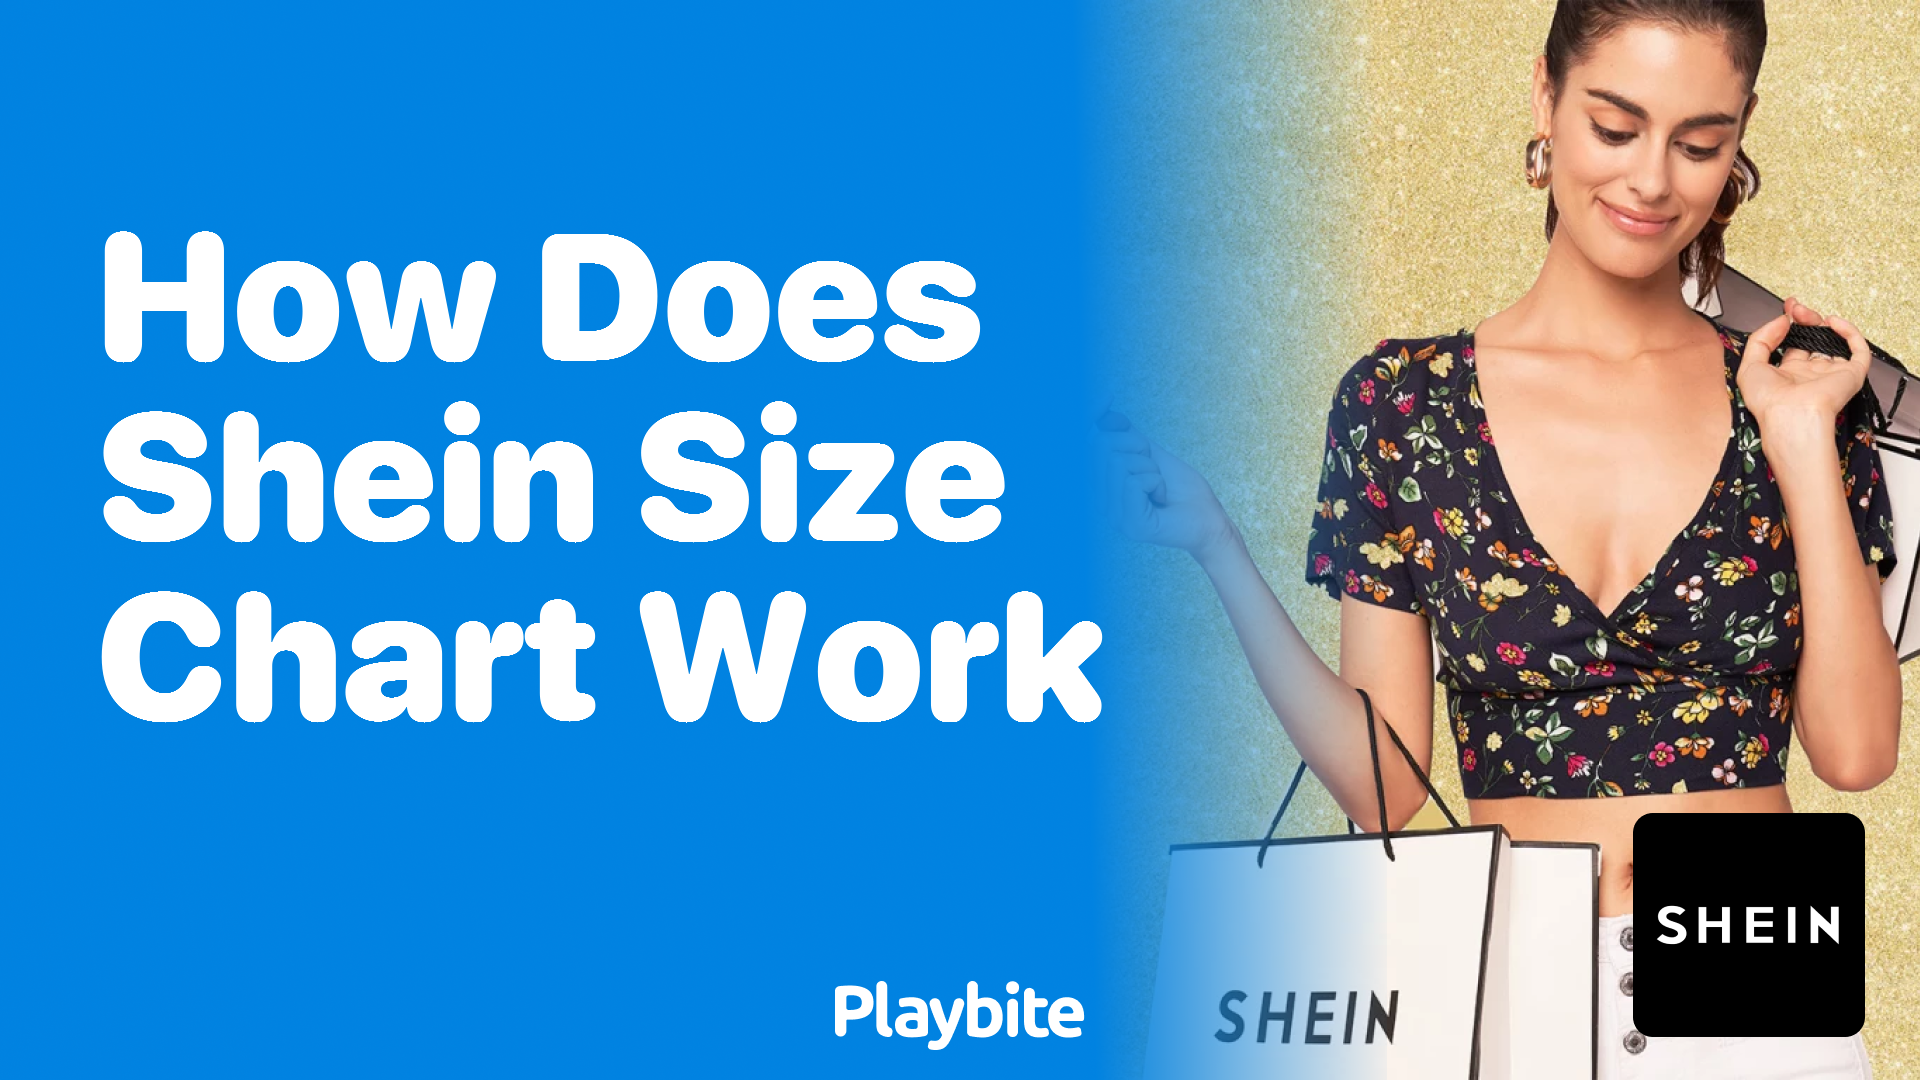 How to Figure Out Your SHEIN Size for the Perfect Fit - Playbite